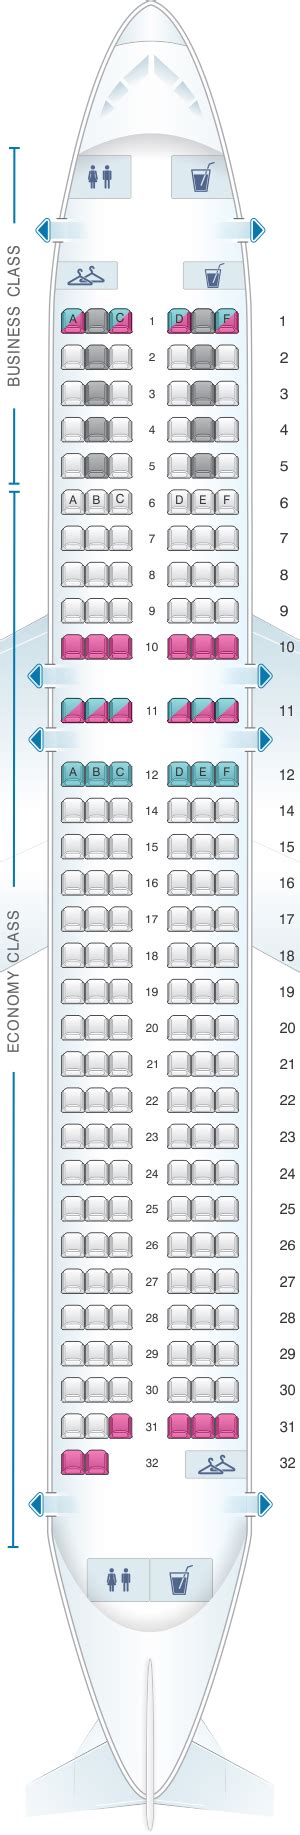 Seat Map Air France Airbus A320 Europe V2 Air France Airbus Airlines